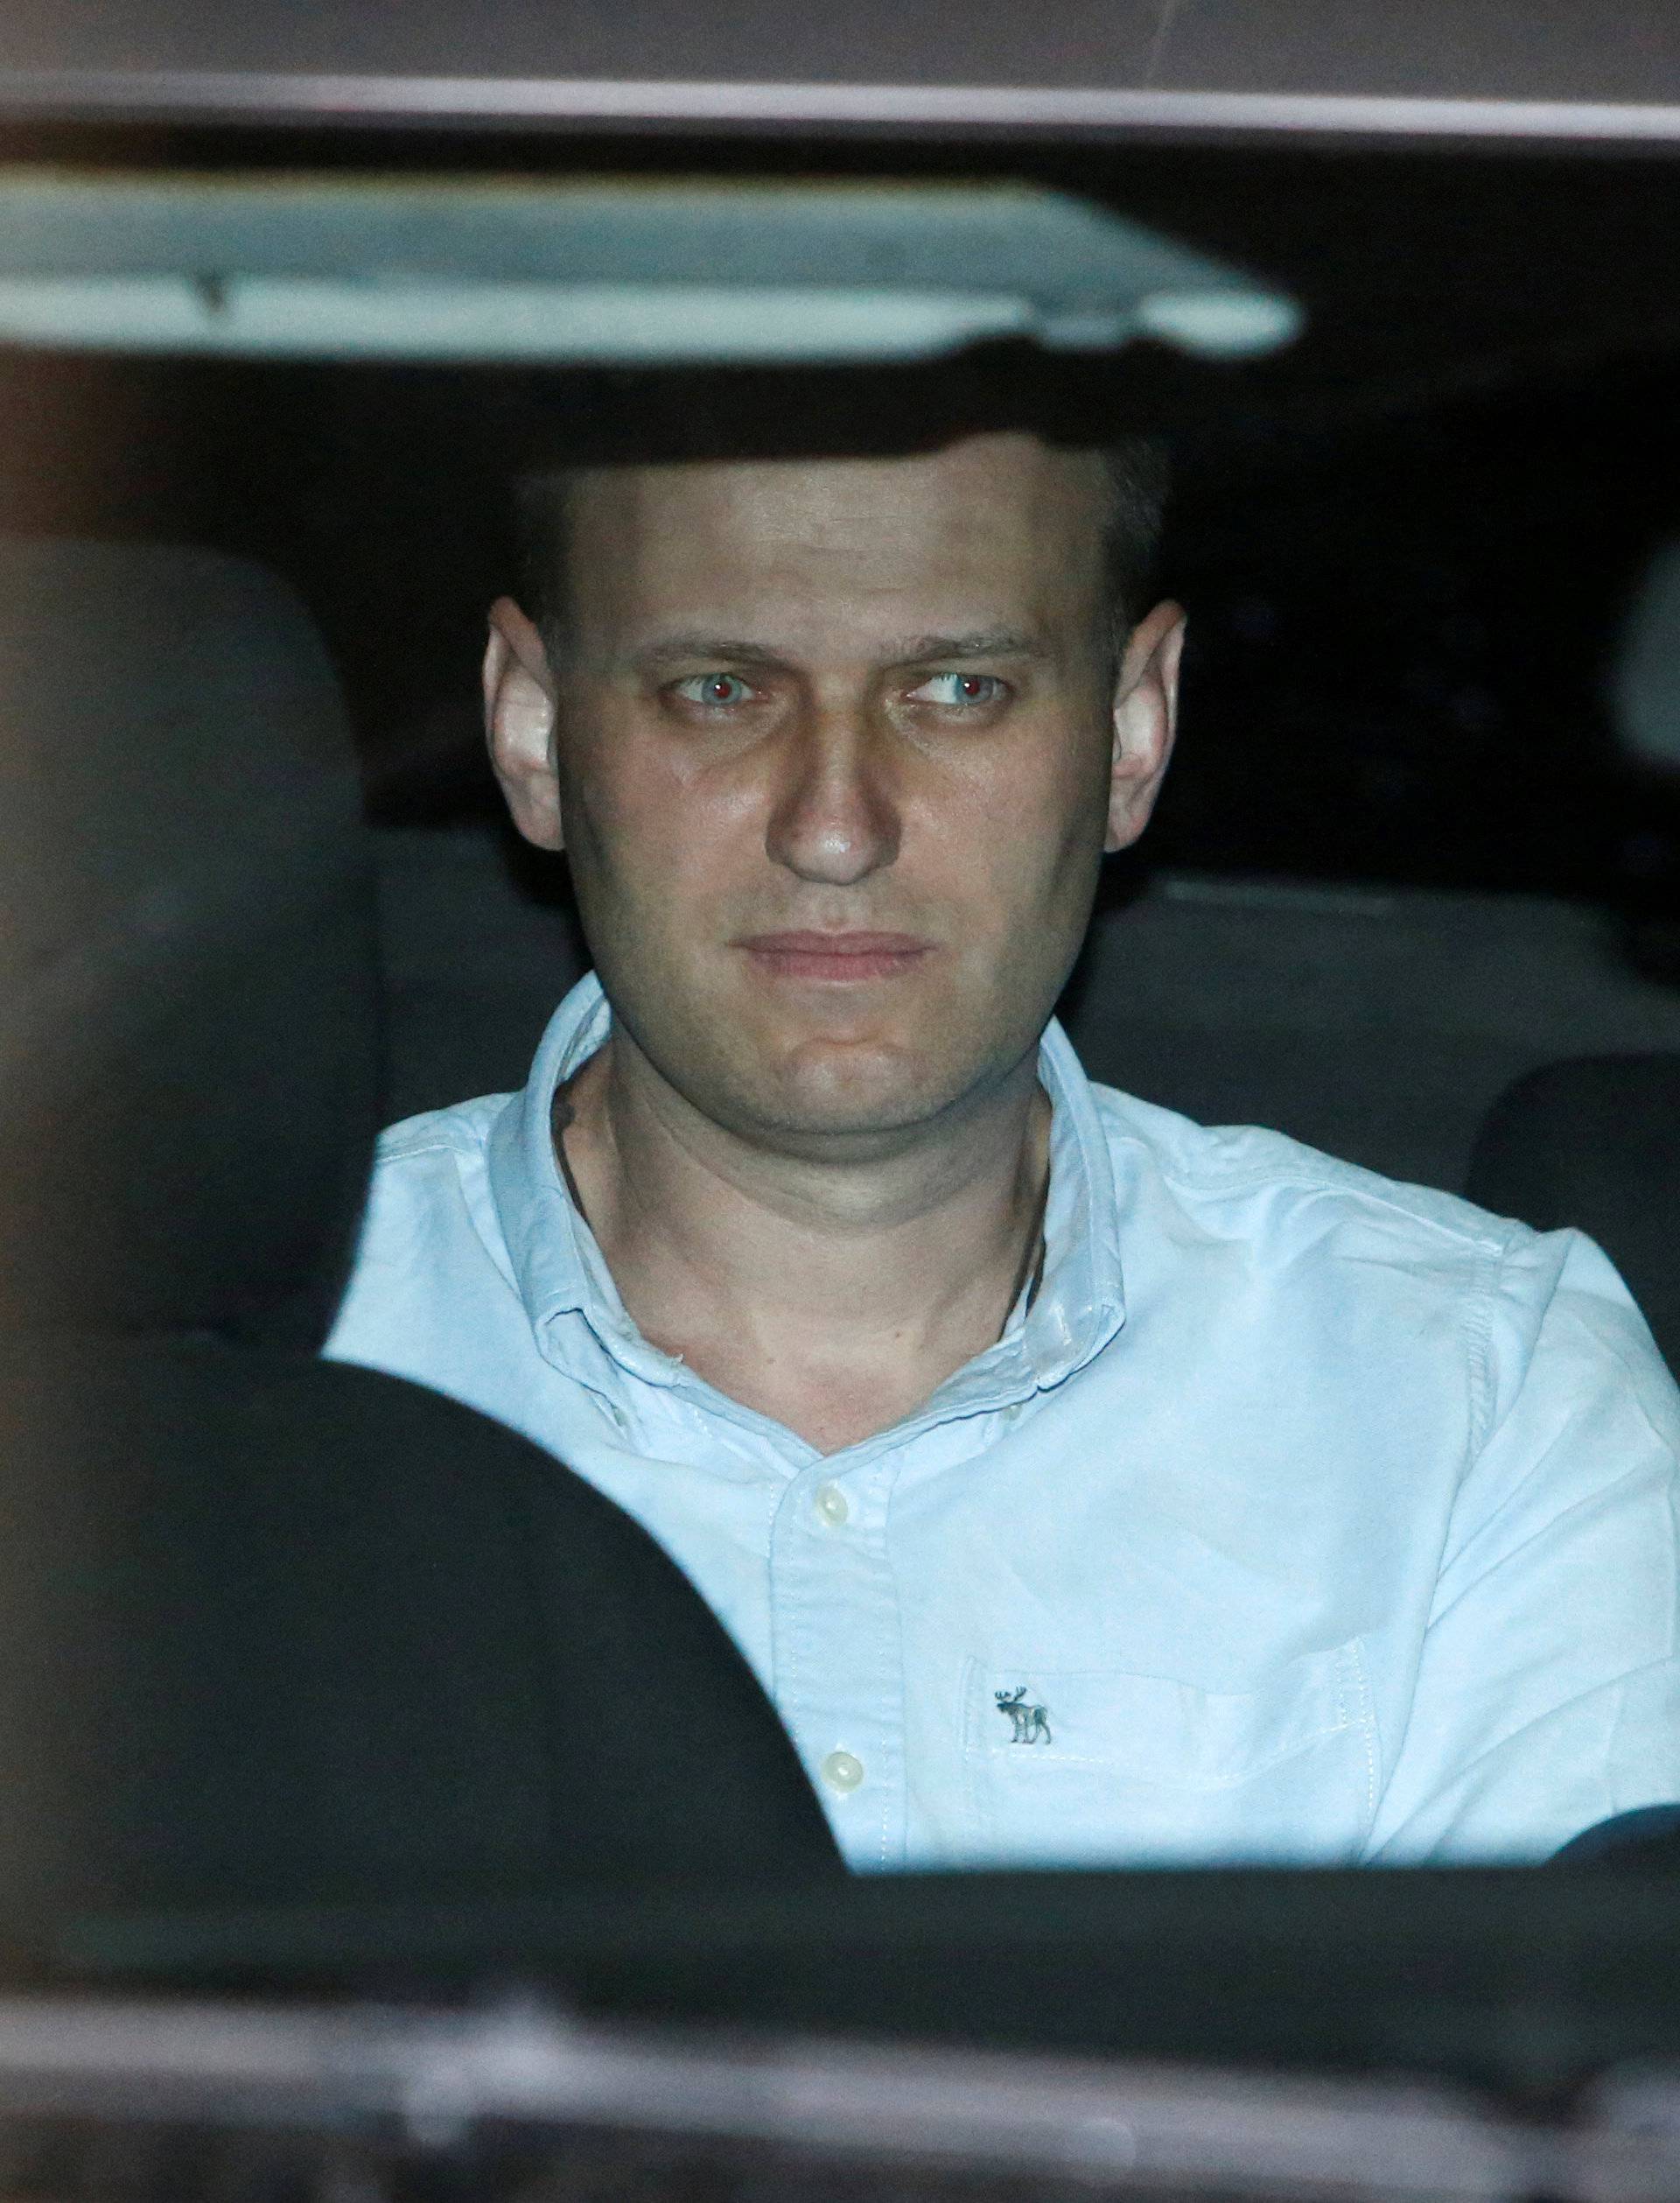 Russian opposition leader Navalny sits in a police car after being found guilty by a court of repeatedly violating the law on organizing public meetings, in Moscow